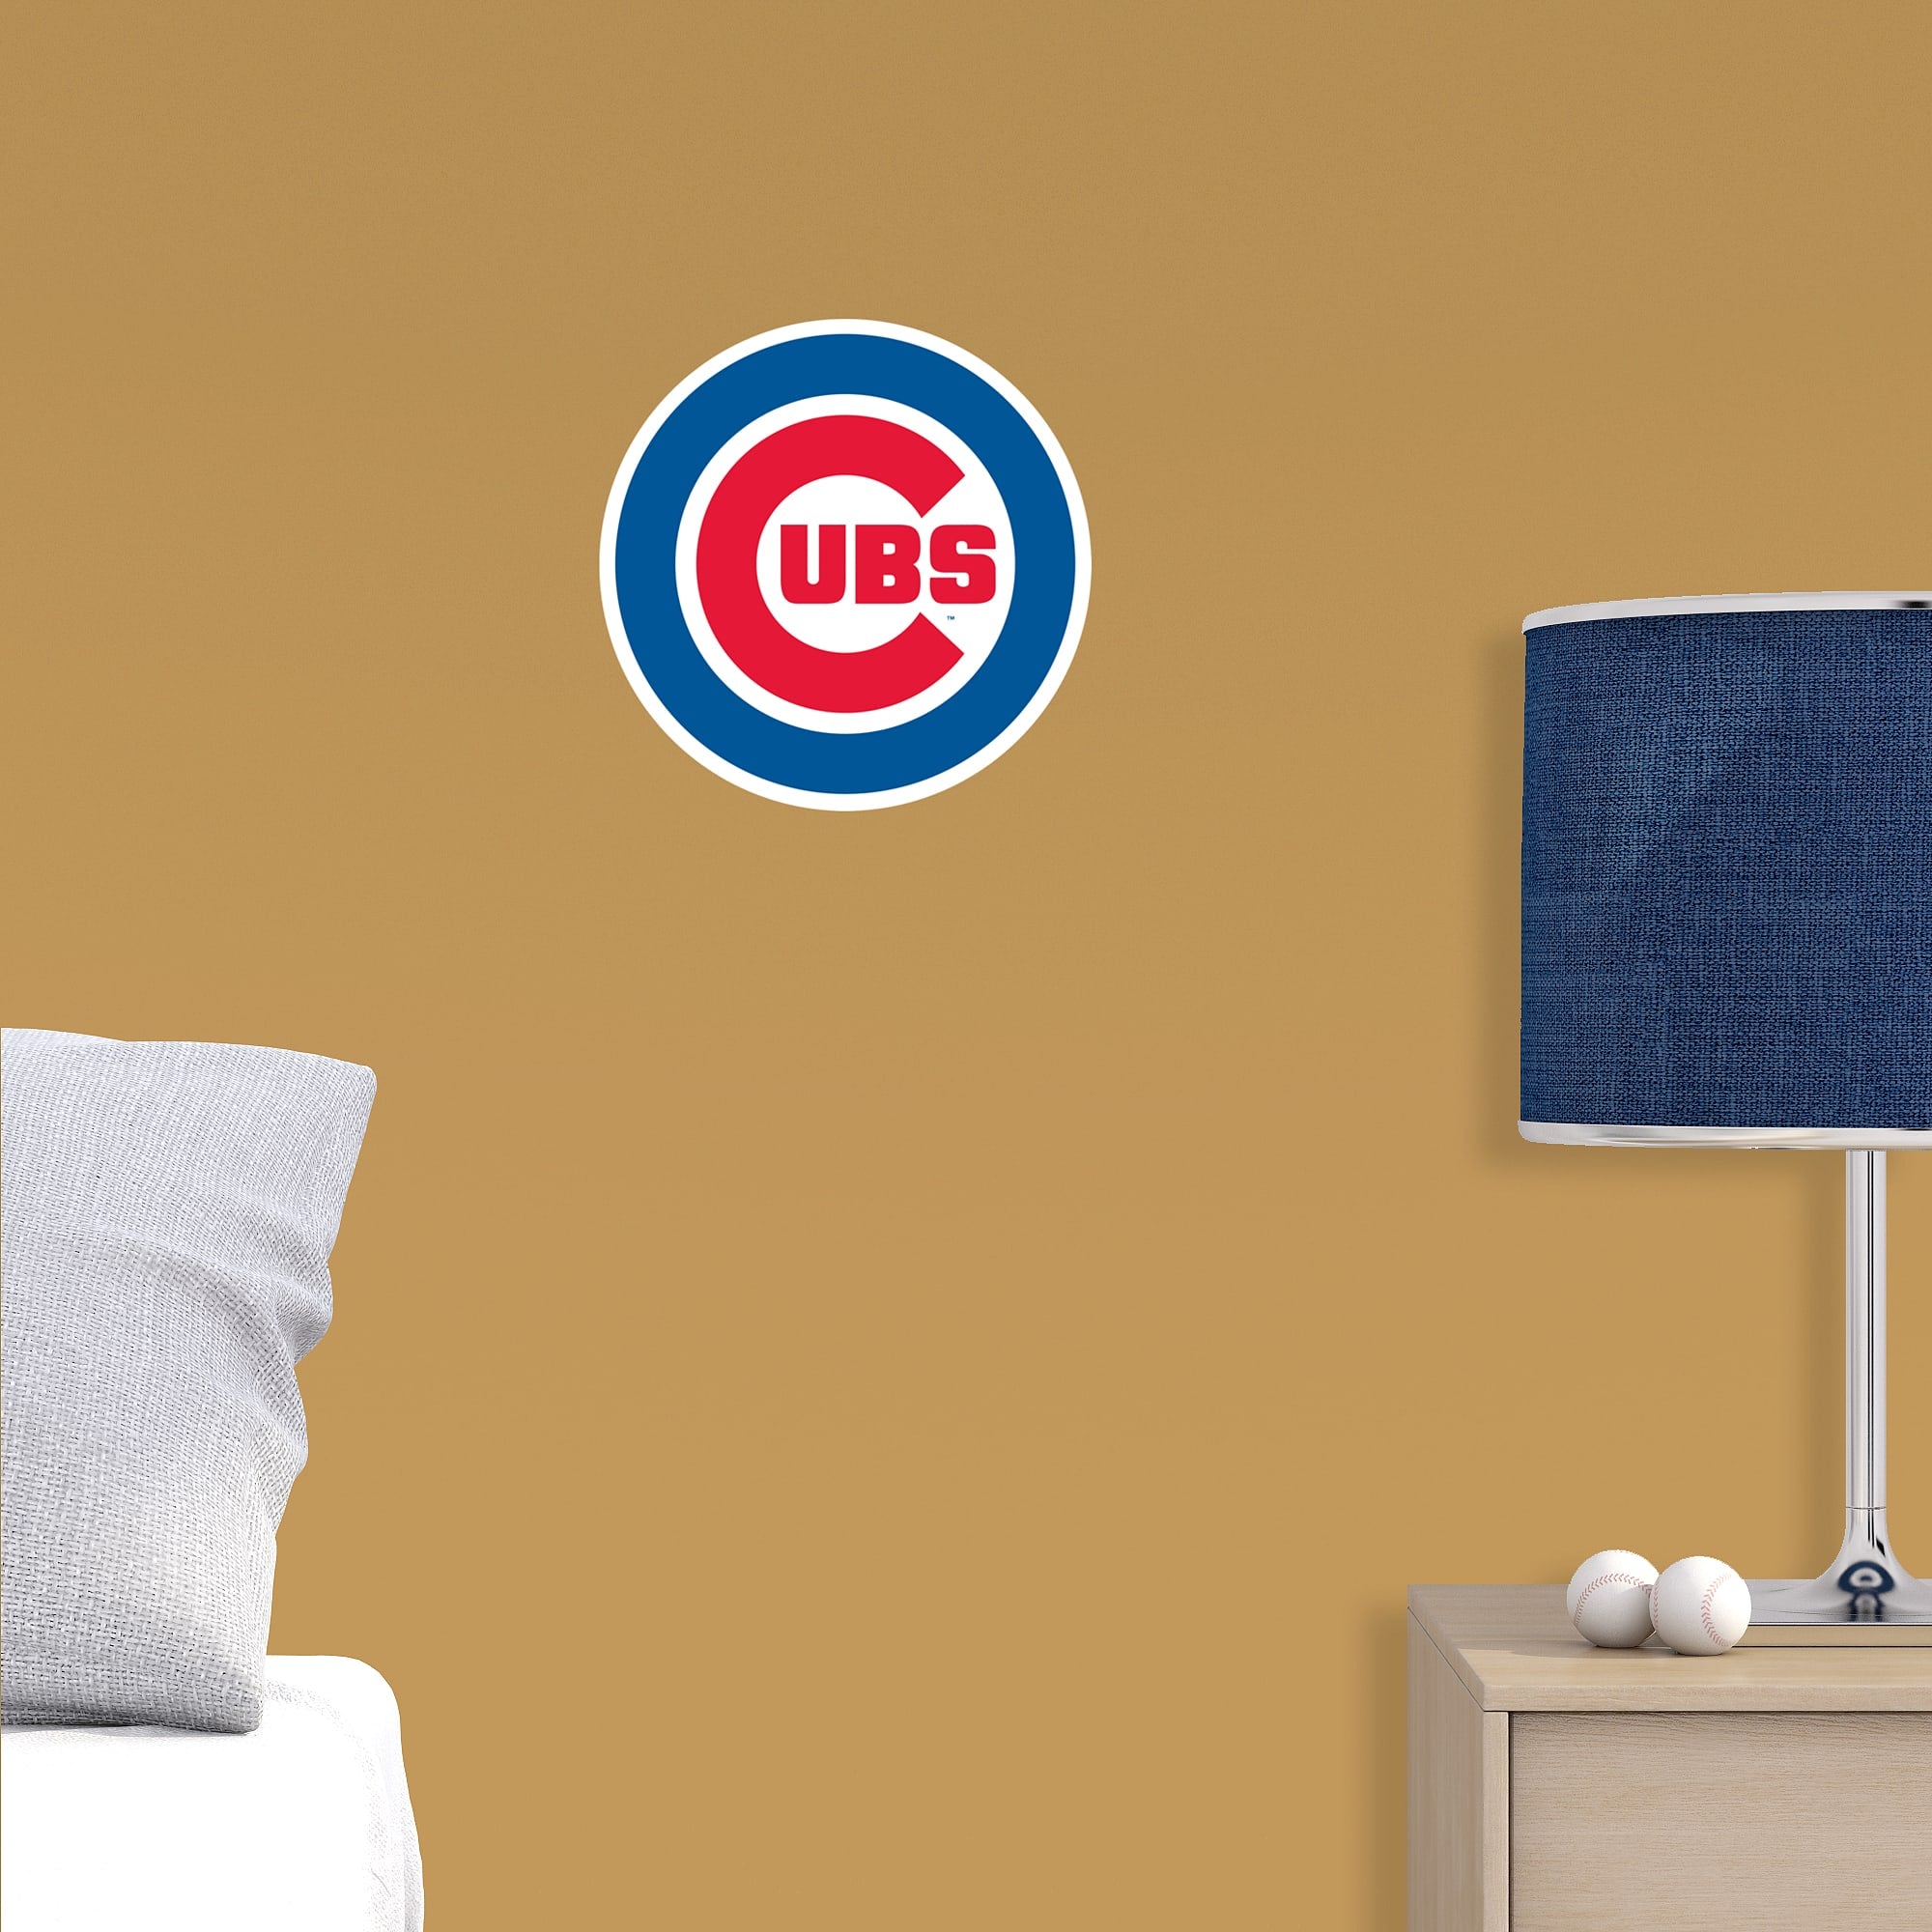 Chicago Cubs: Logo - Officially Licensed MLB Removable Wall Decal Large by Fathead | Vinyl